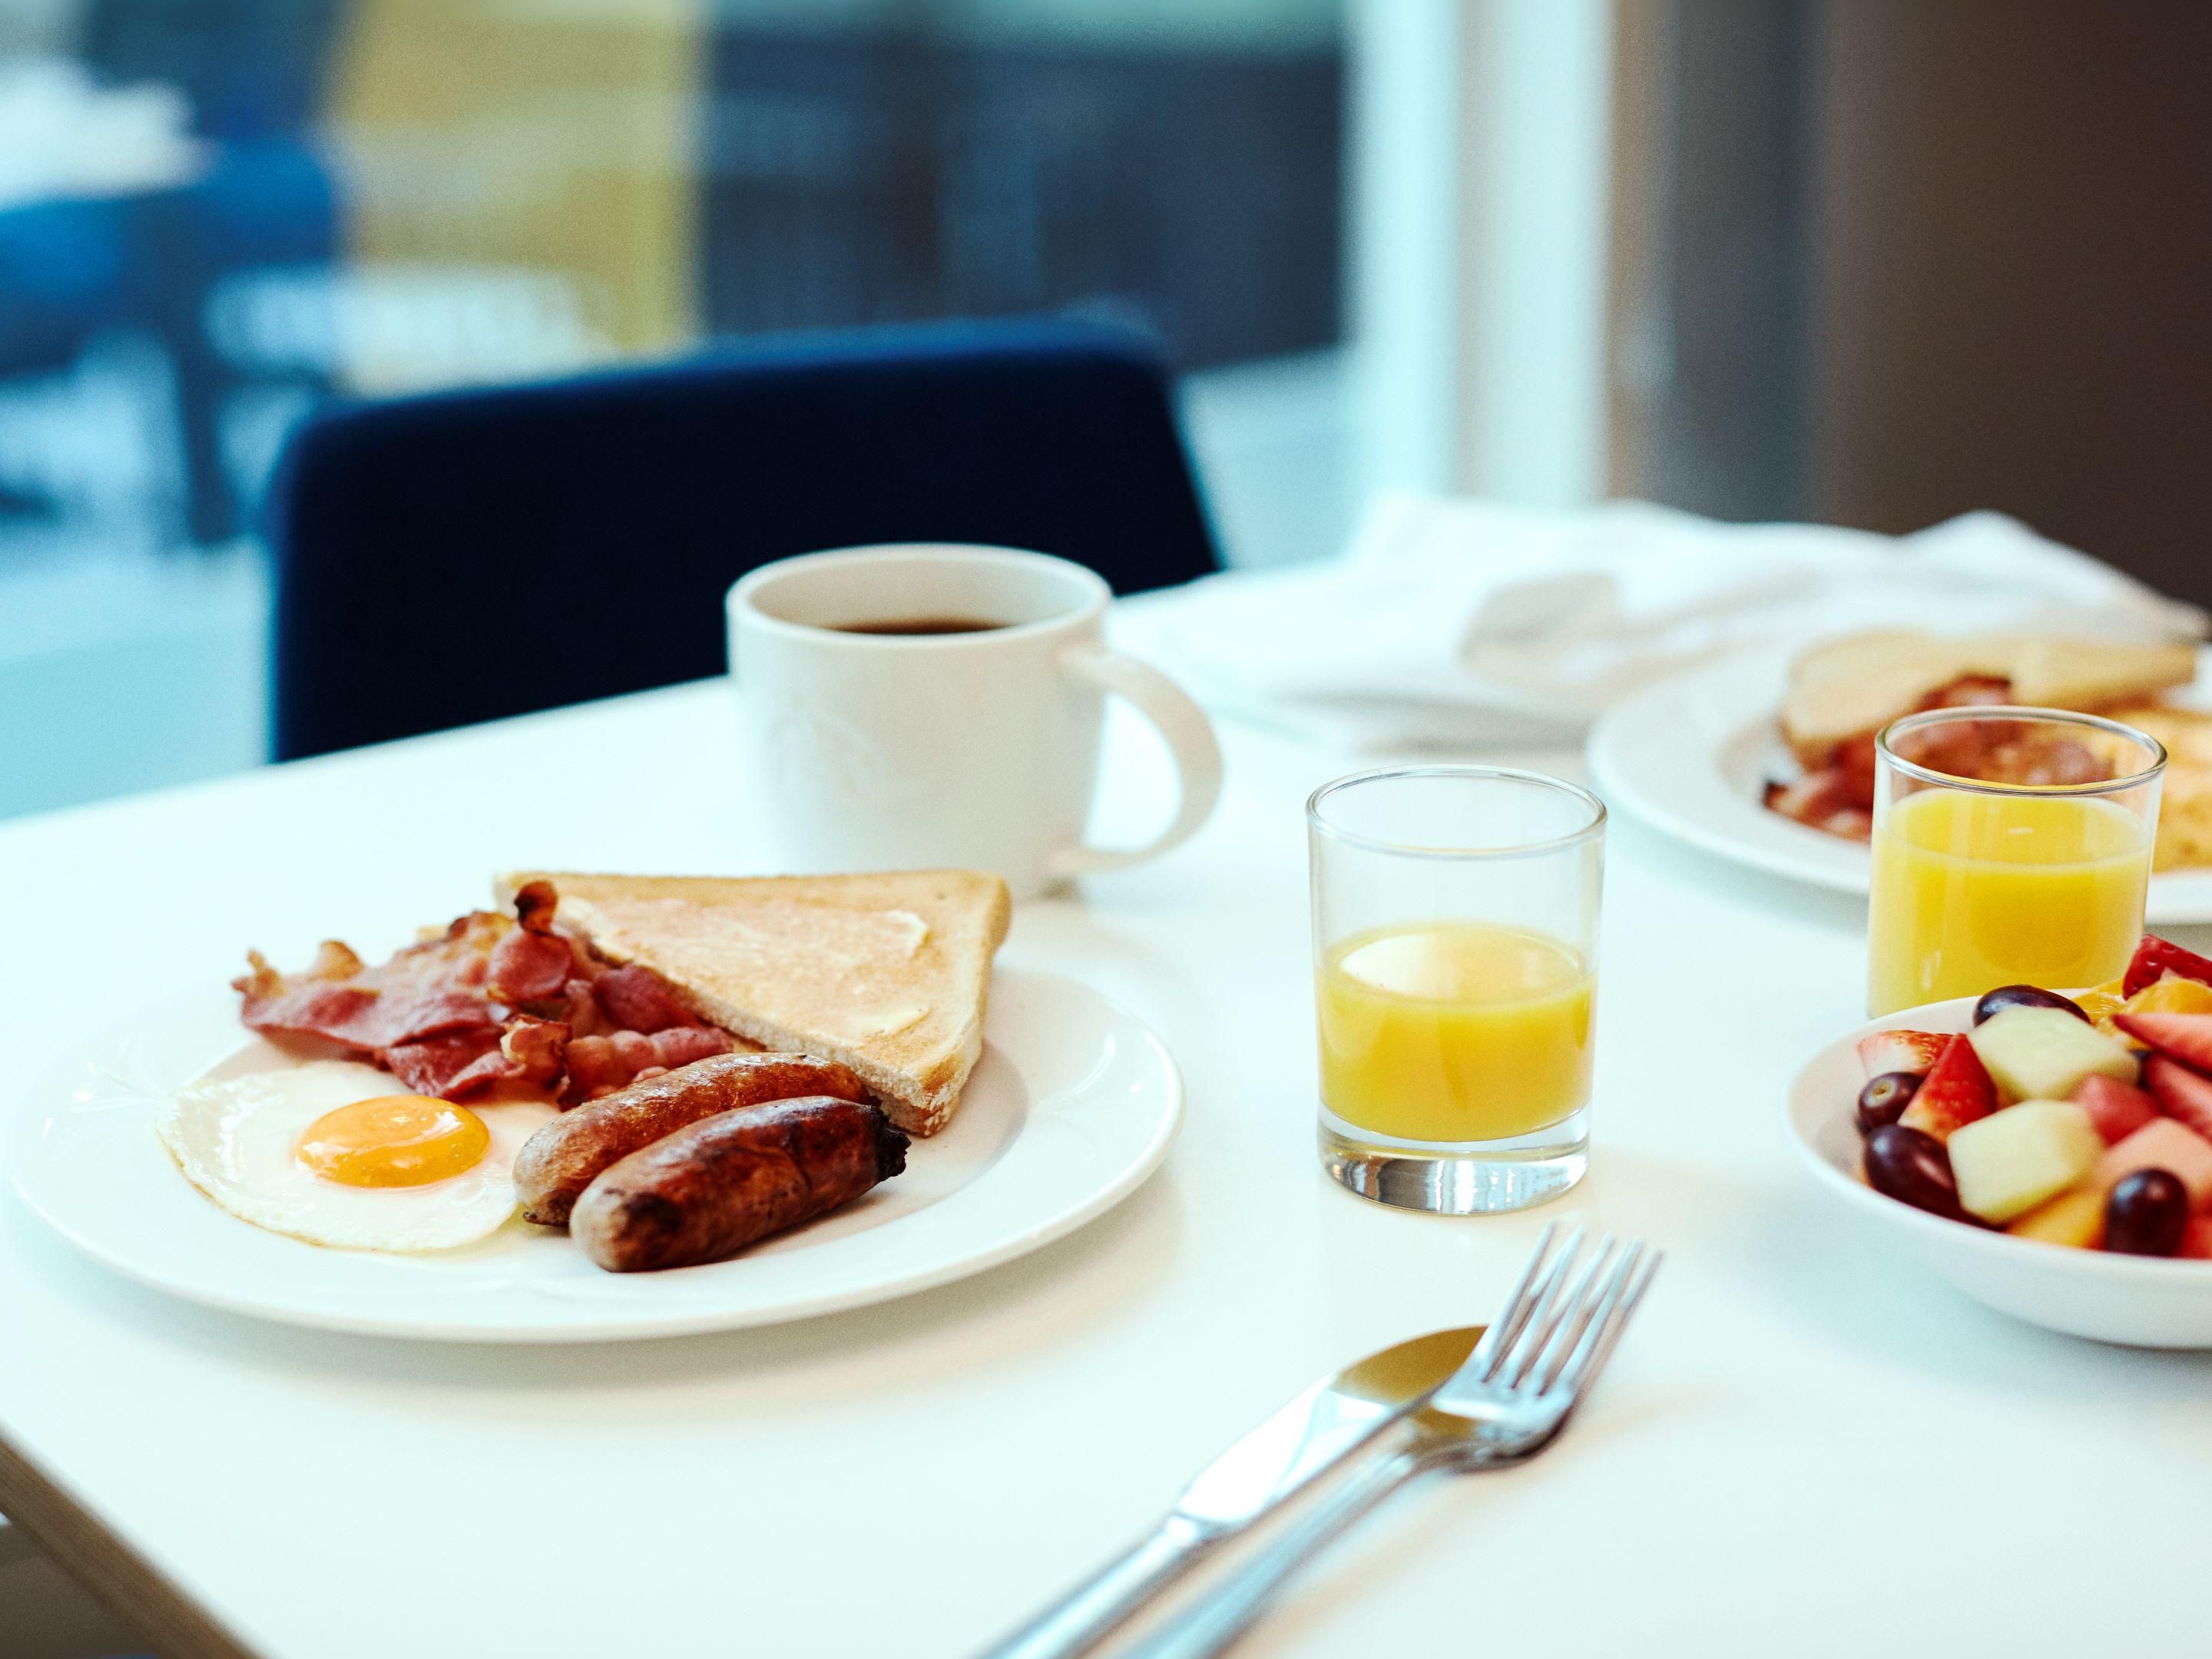 Start the morning with our breakfast buffet served daily.